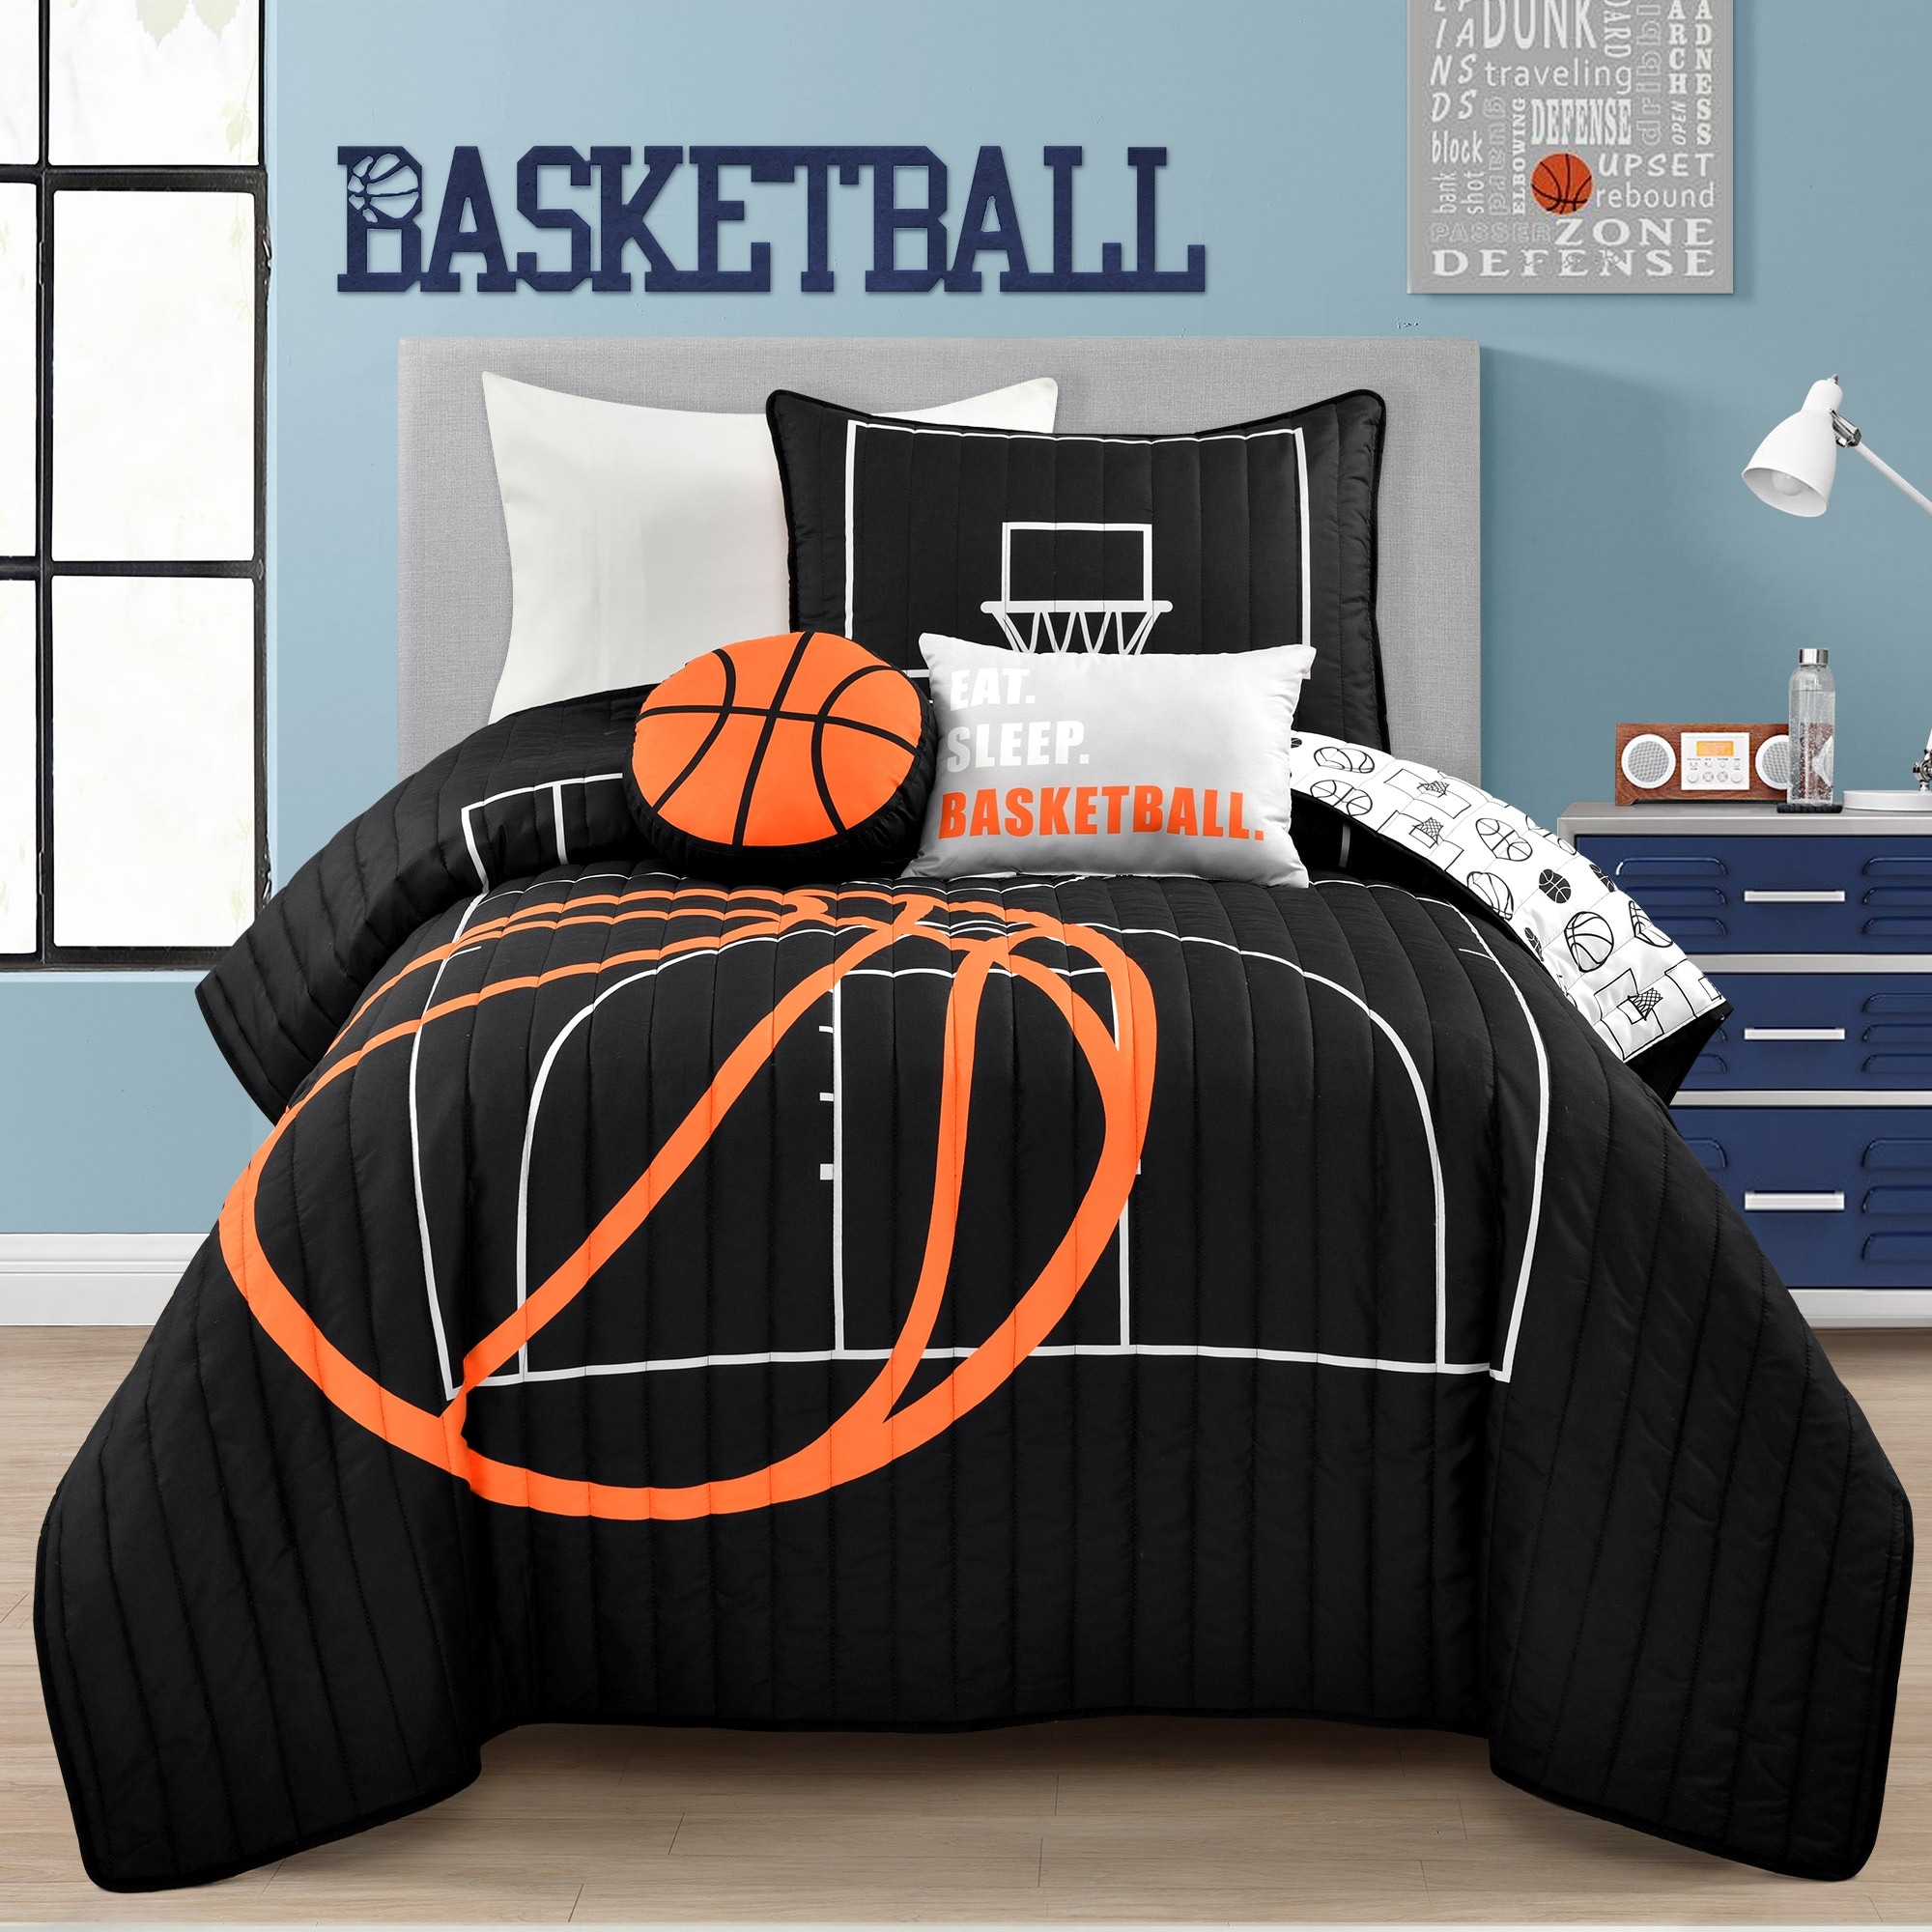 https://ak1.ostkcdn.com/images/products/is/images/direct/8a622e1fc4628186596d82b7db70dc7458ede15d/Lush-Decor-Basketball-Game-Quilt-Set.jpg